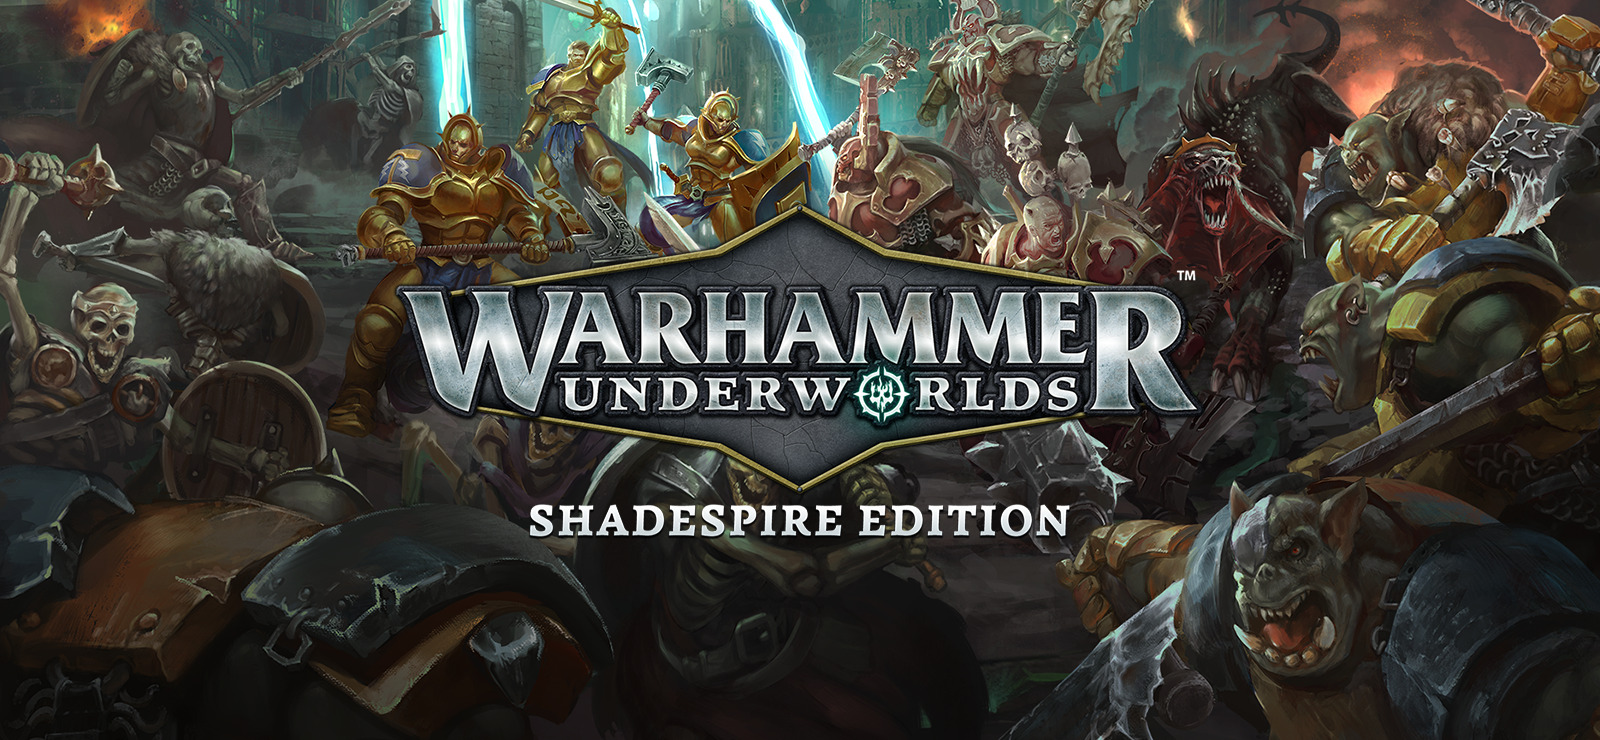 10 Reasons to Play 'Warhammer Underworlds: Shadespire' With Your